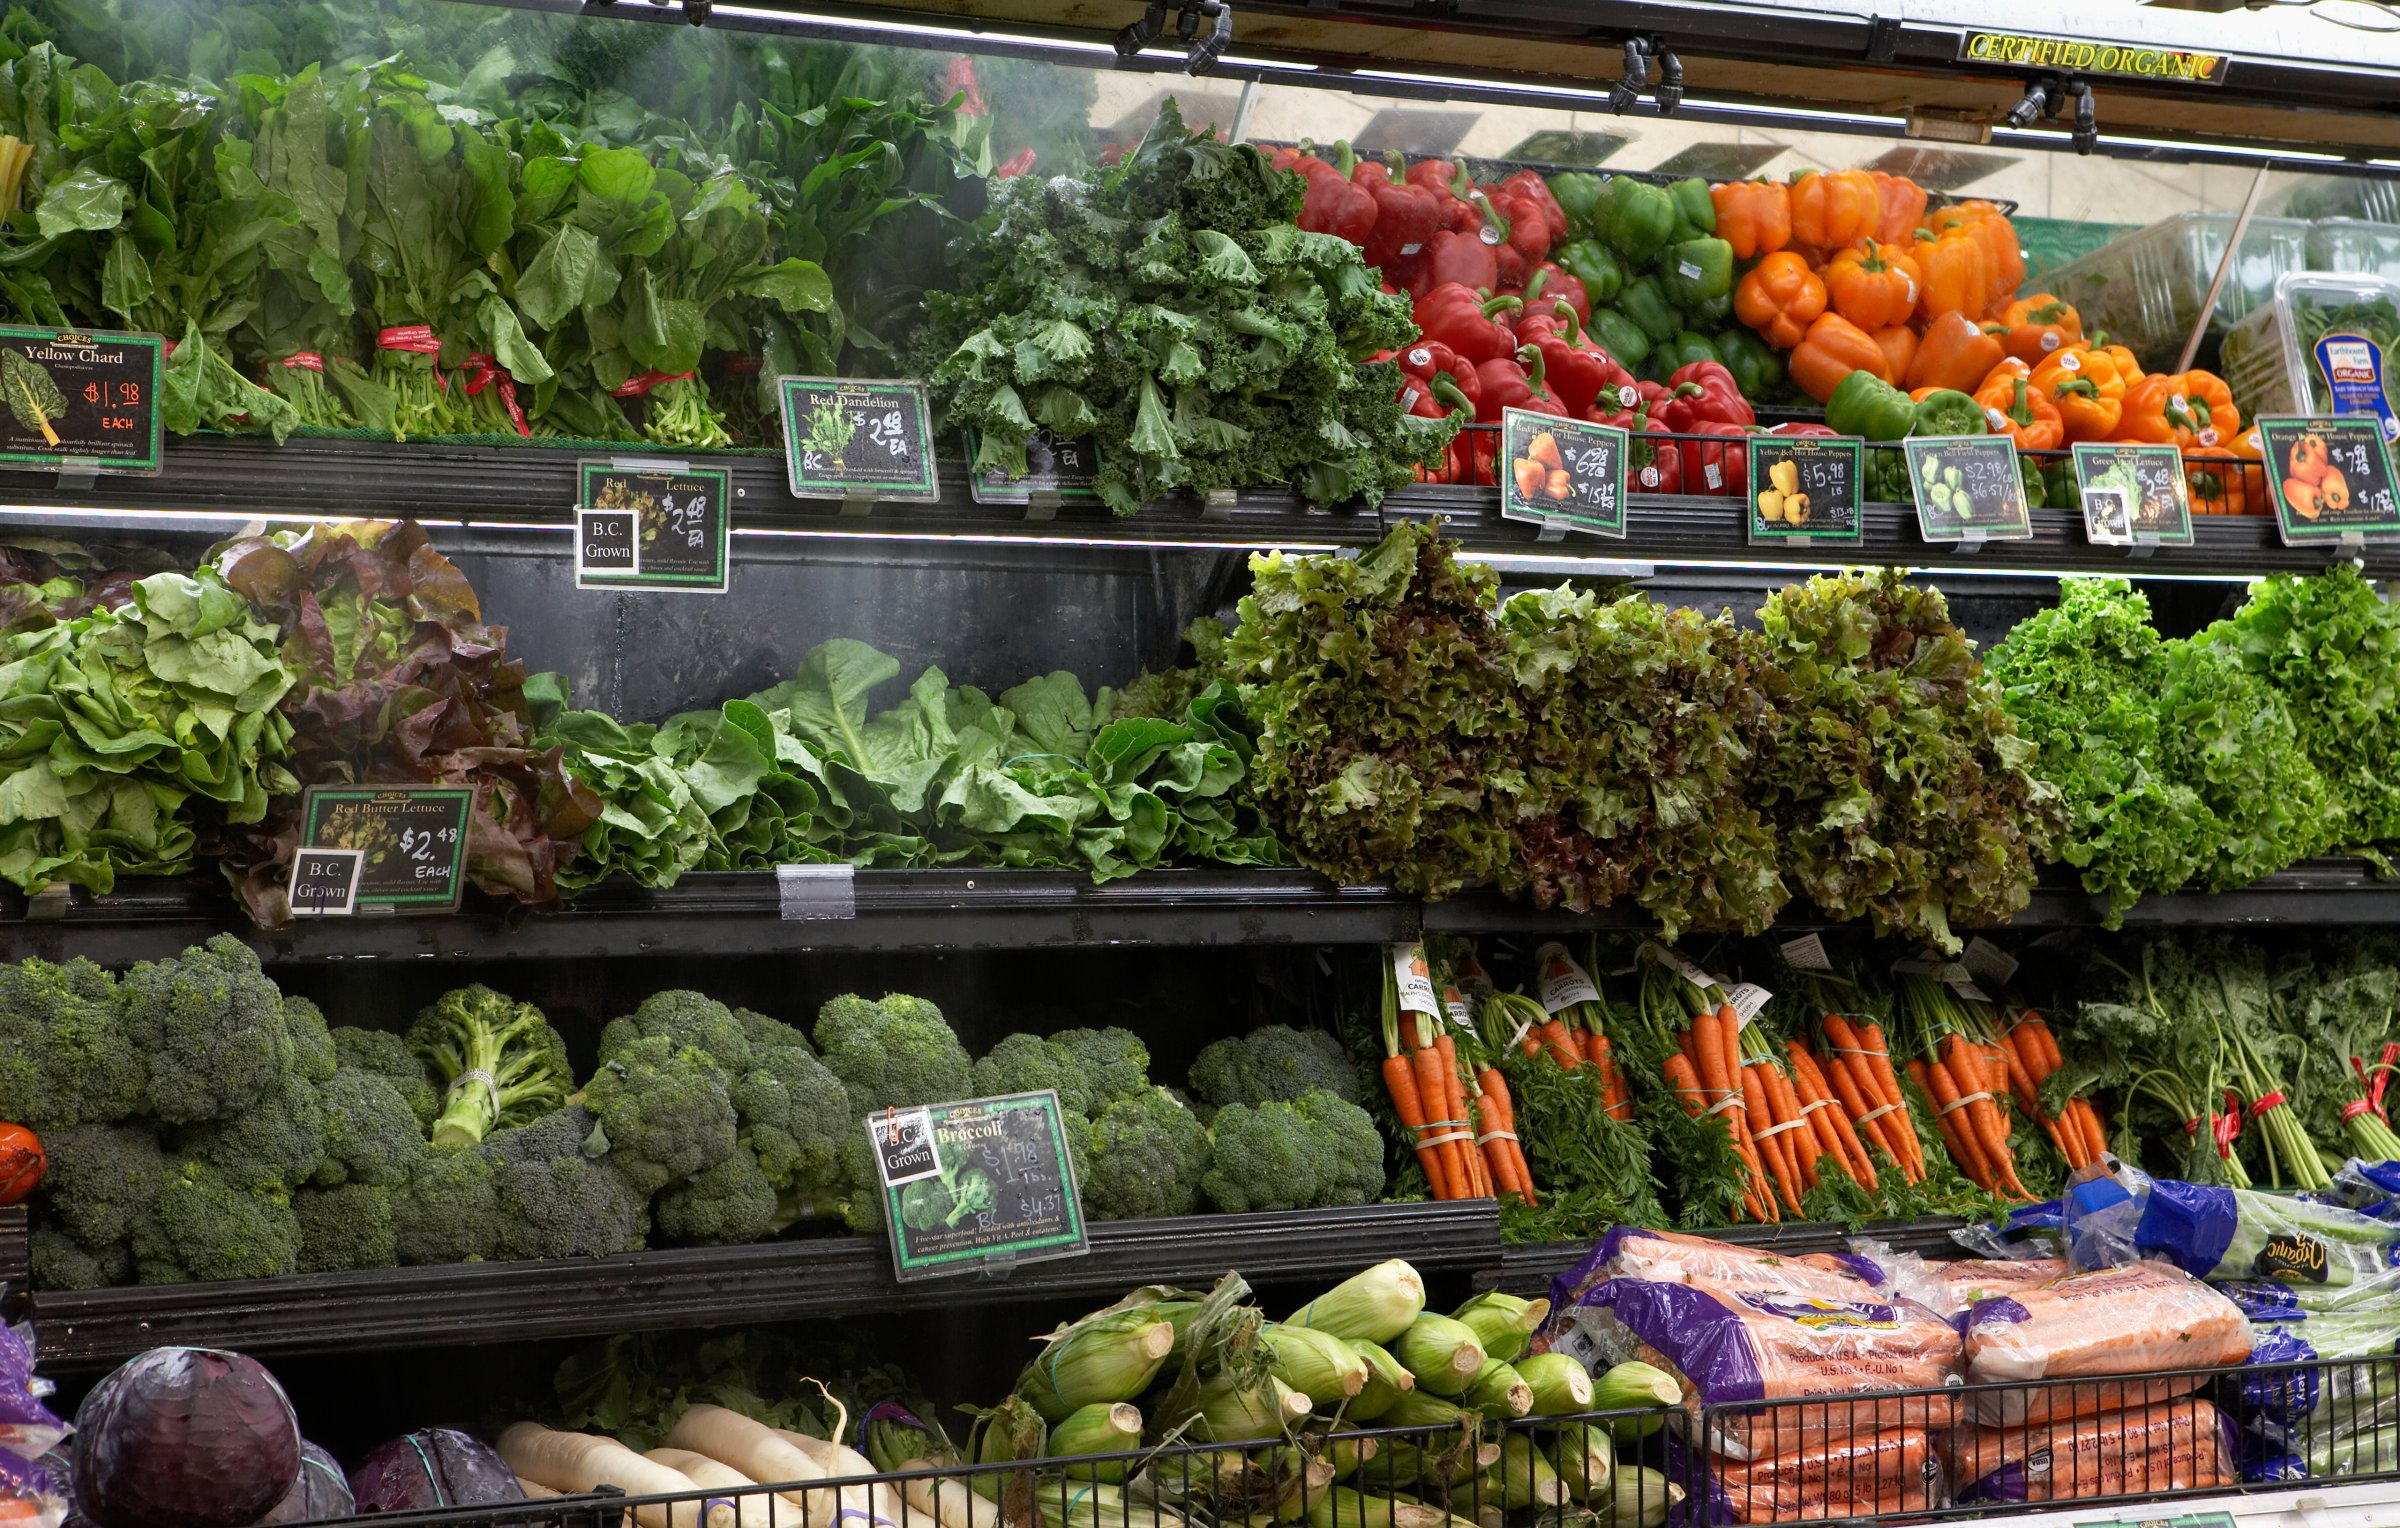 Produce aisle in supermarket, close-up